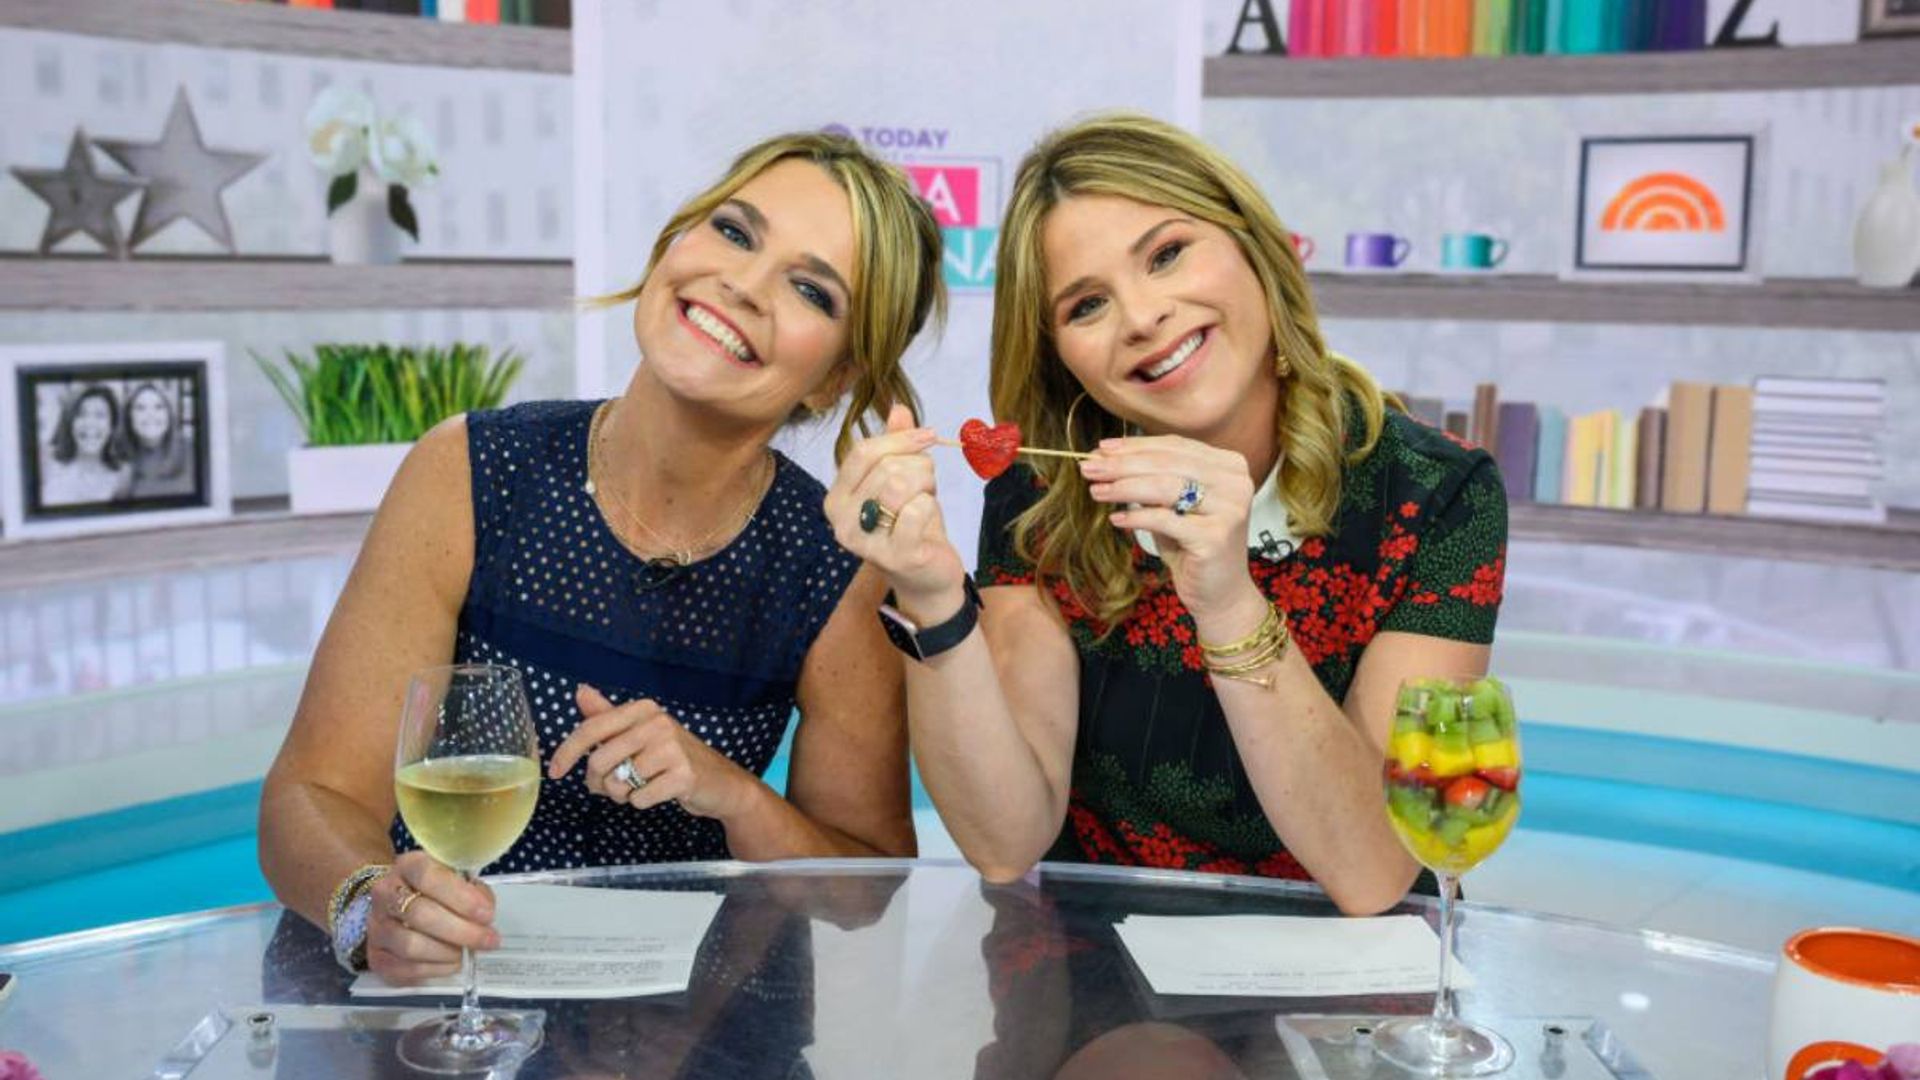 Savannah Guthrie and Jenna Bush Hager wow fans with an unexpected look in crop tops and hot pants